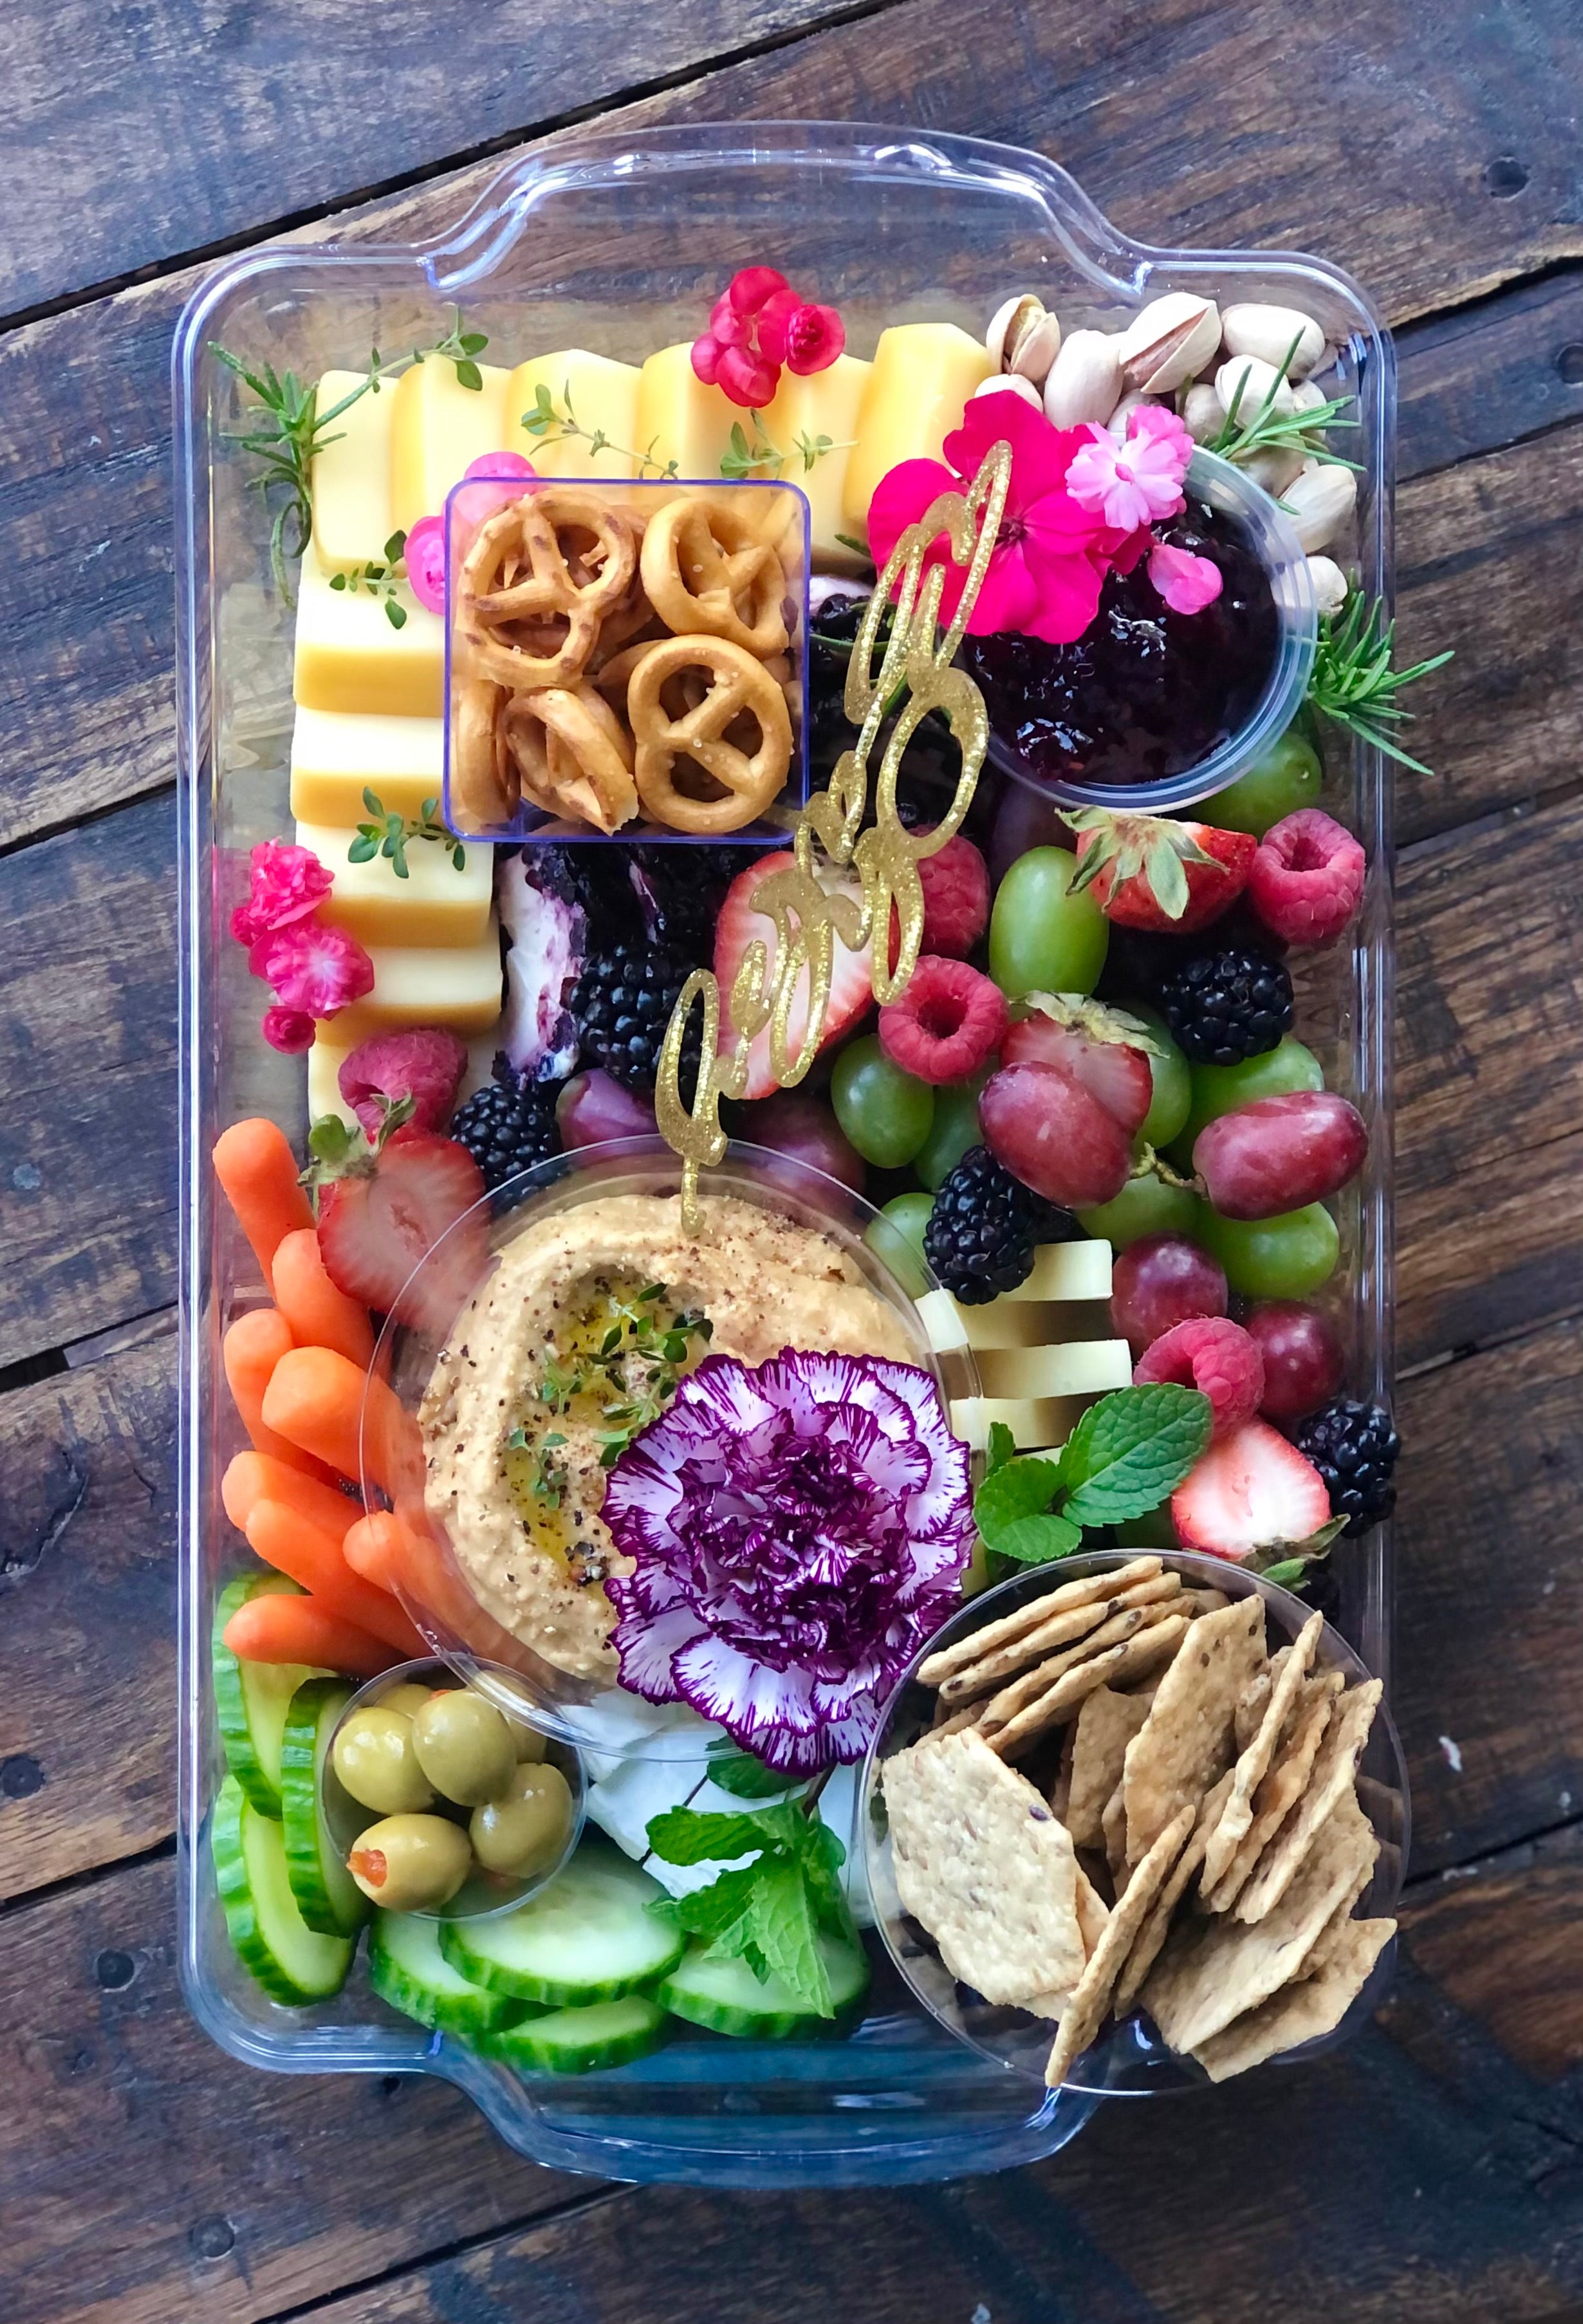 Vegetarian Graze platter with fruit, veggies, select cheeses, spreads and crackers